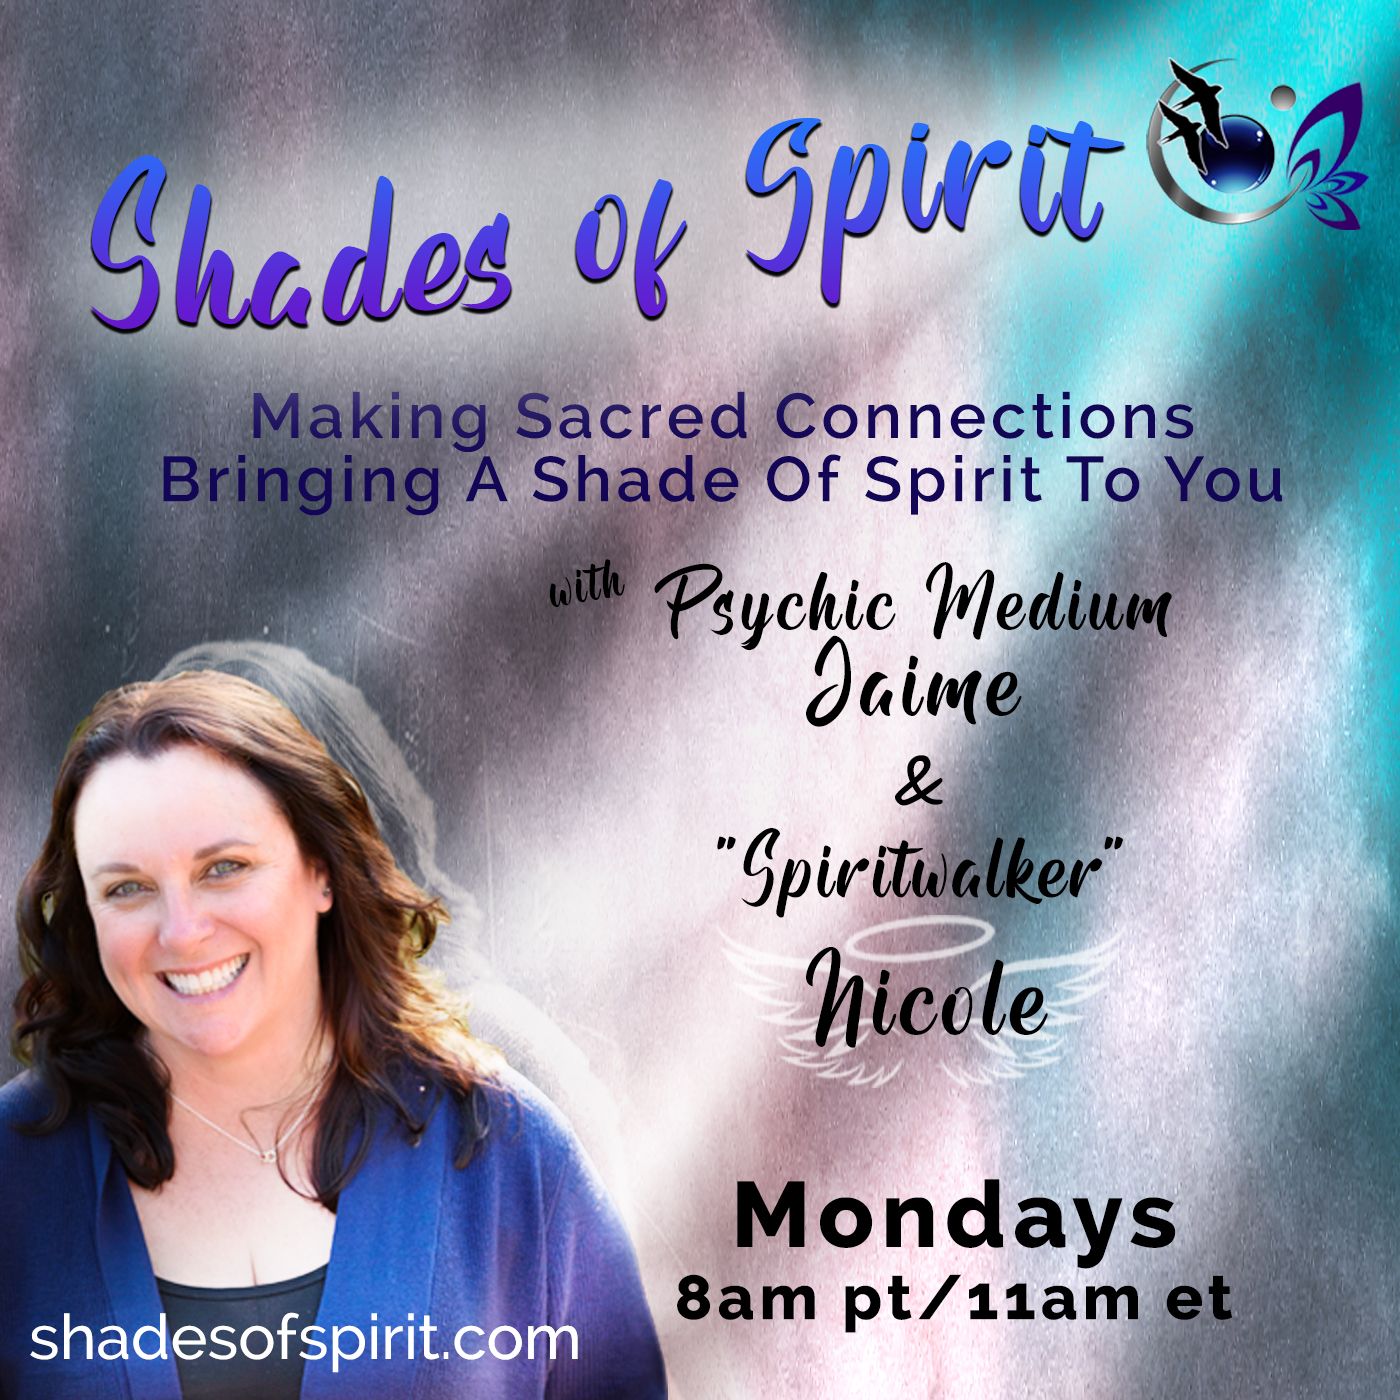 Shades of Spirit: Making Sacred Connections Bringing A Shade Of Spirit To You